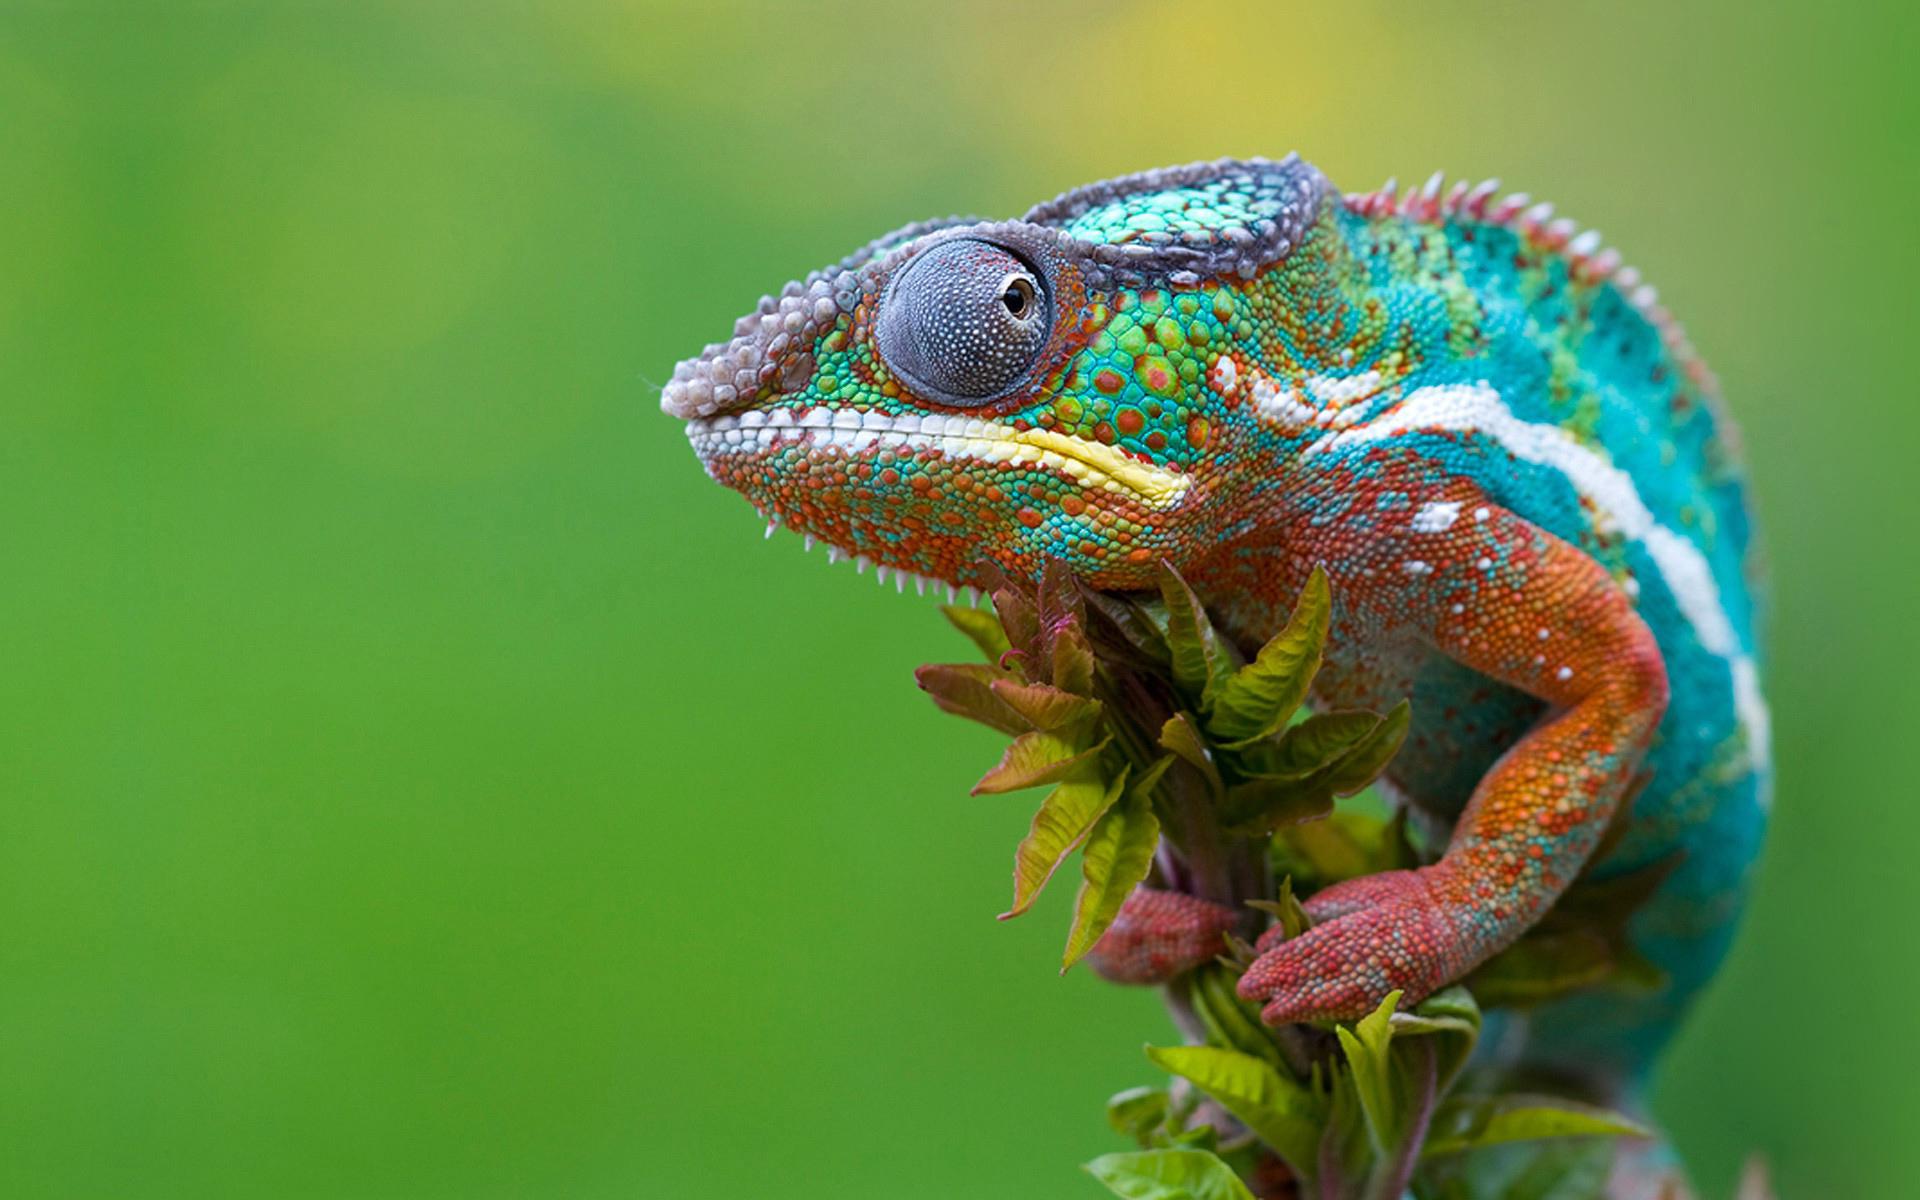 Chameleon color changing abilities unlocked by science - SlashGear